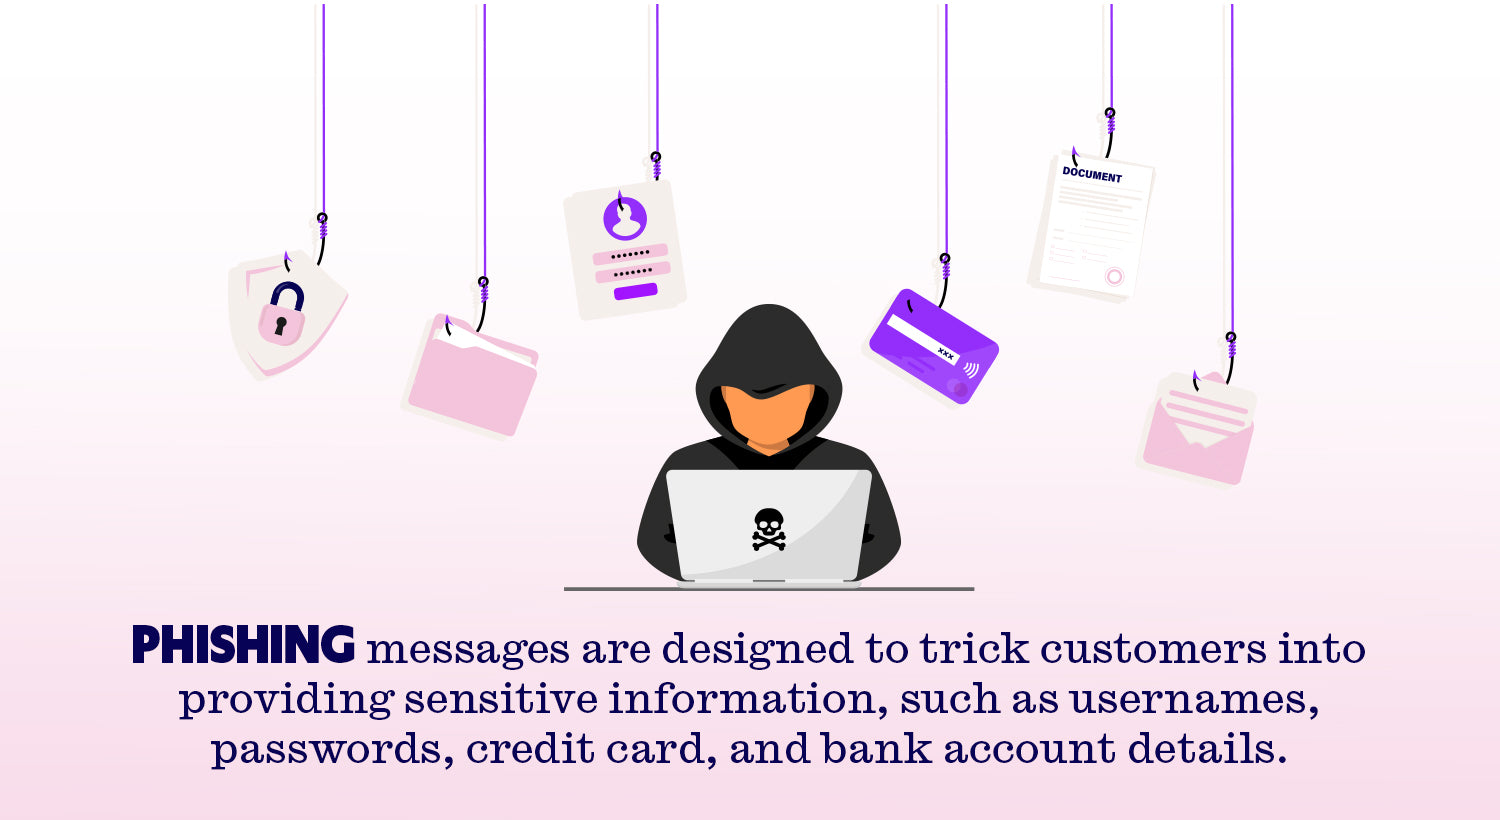 Phishing involves fraudulently targeting customers with fake emails or texts impersonating your business.